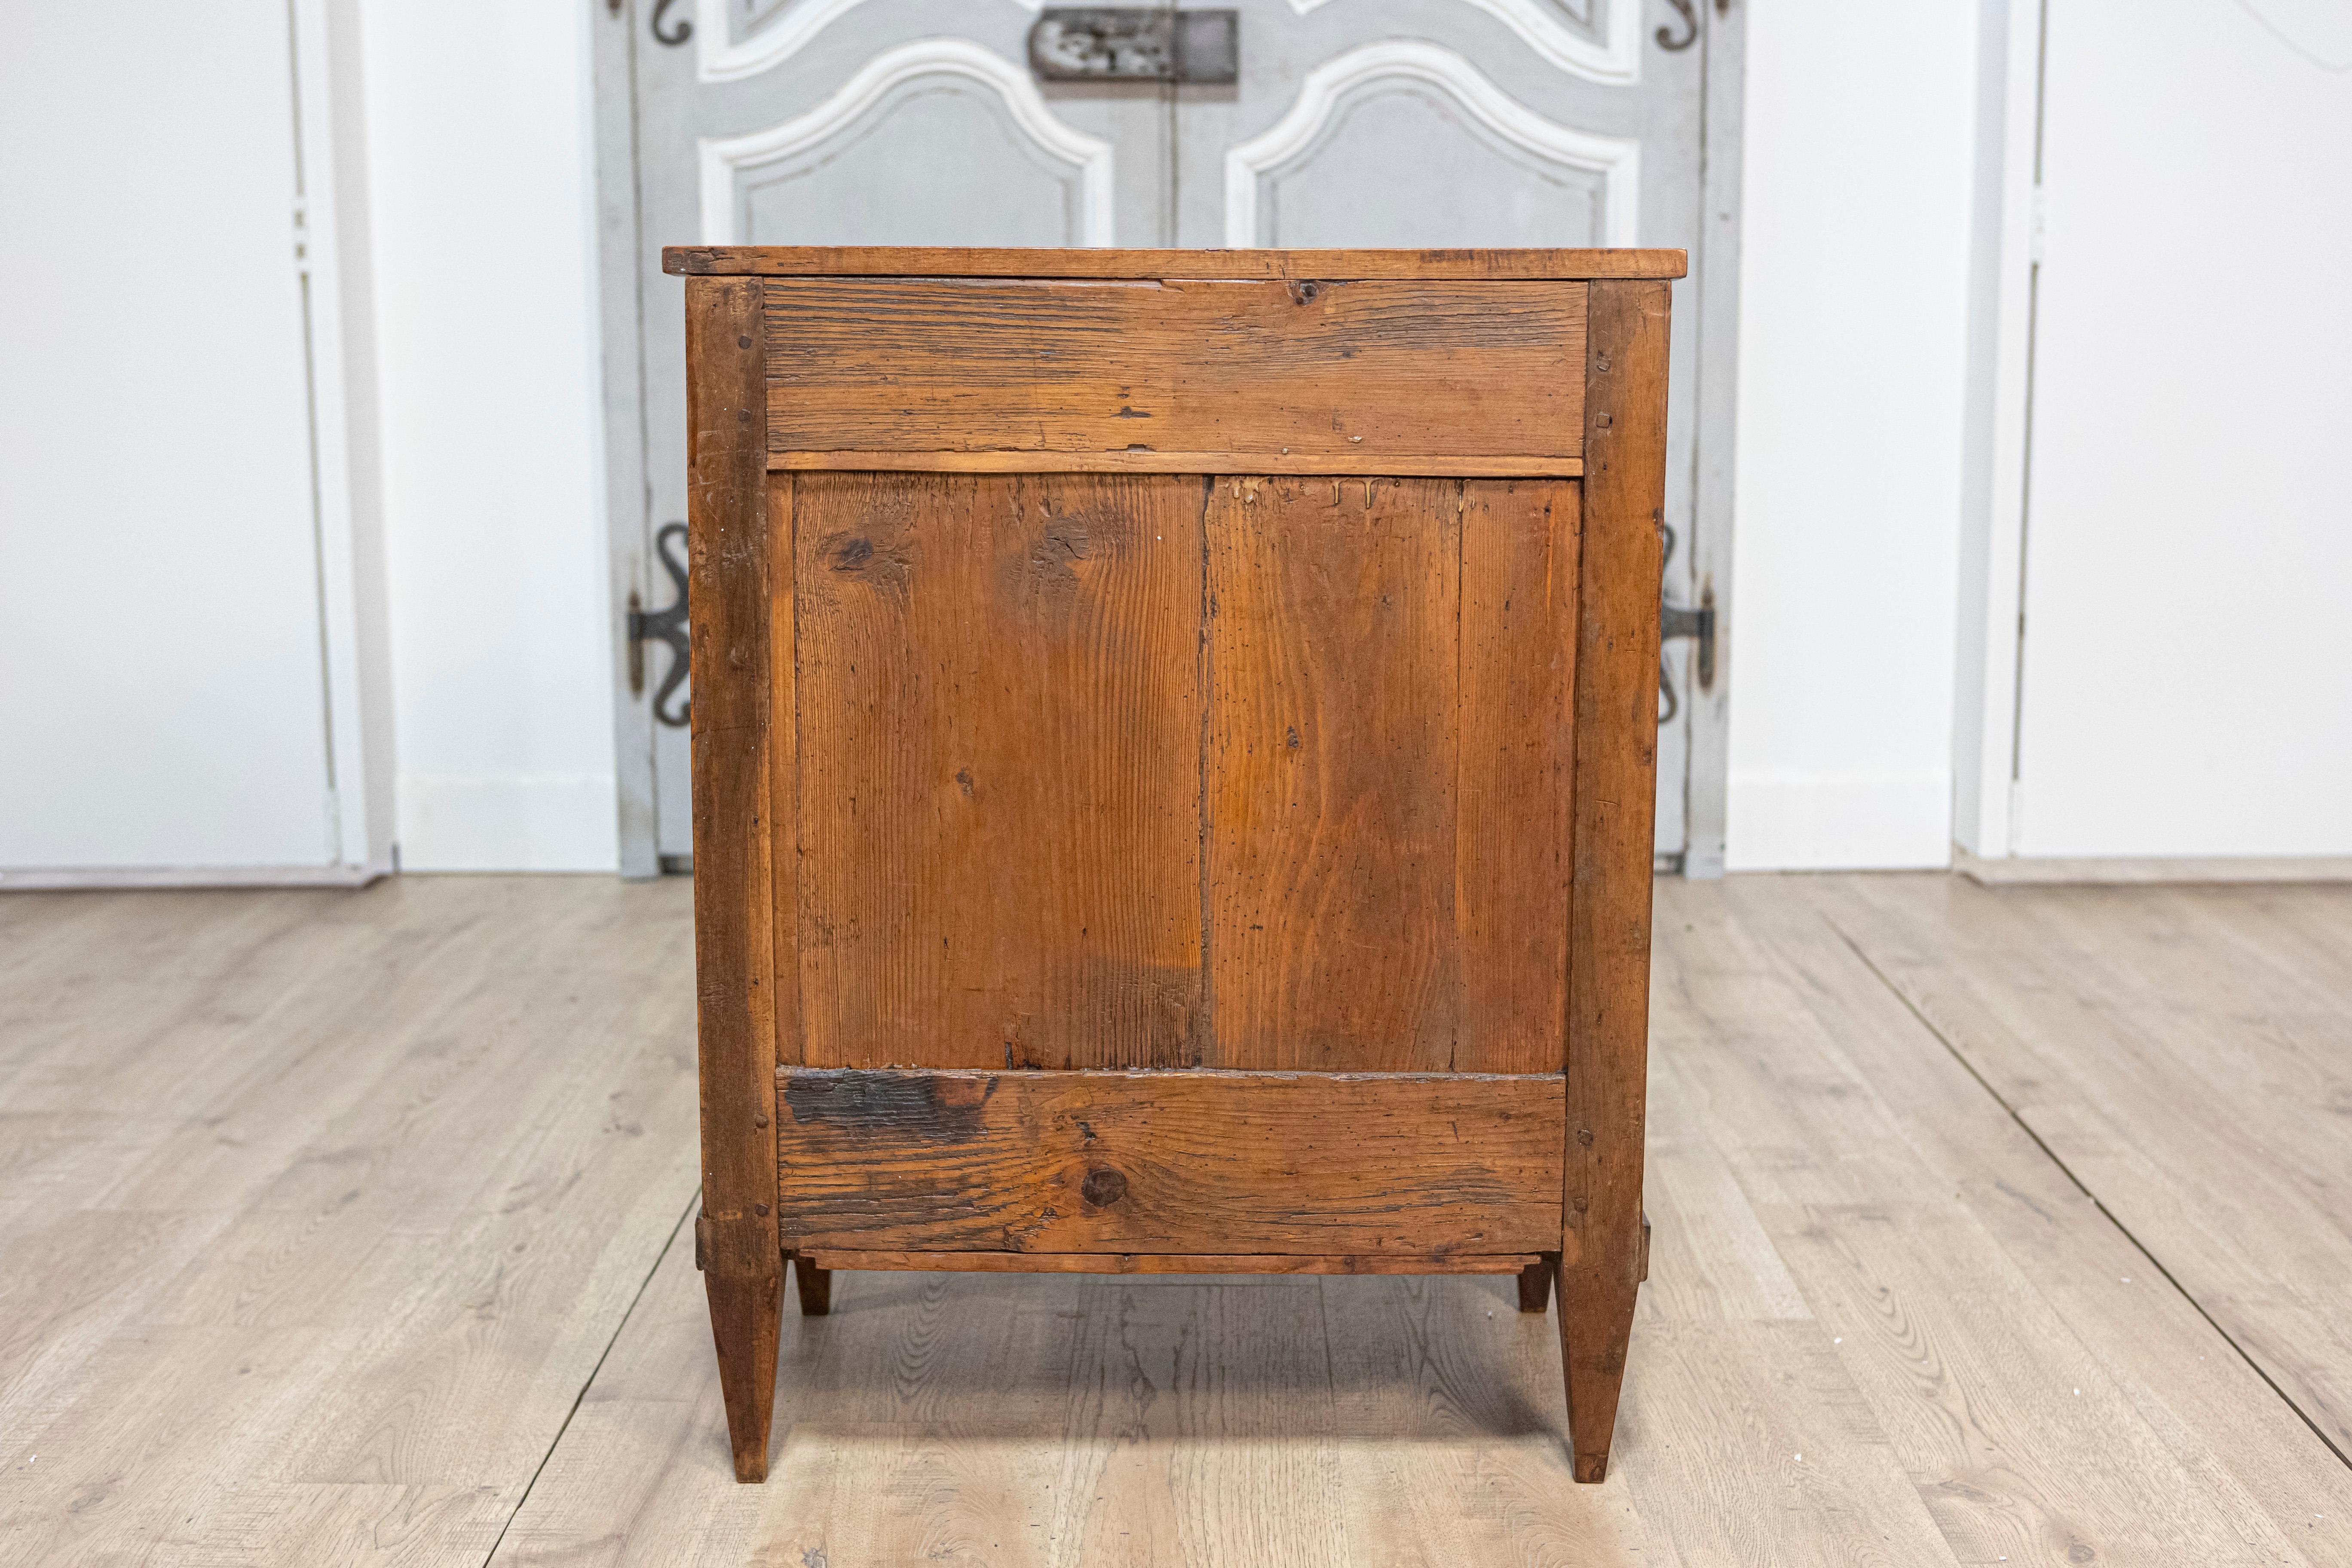 Italian Directoire Period Late 18th Century Three Drawer Walnut Bedside Chest For Sale 5